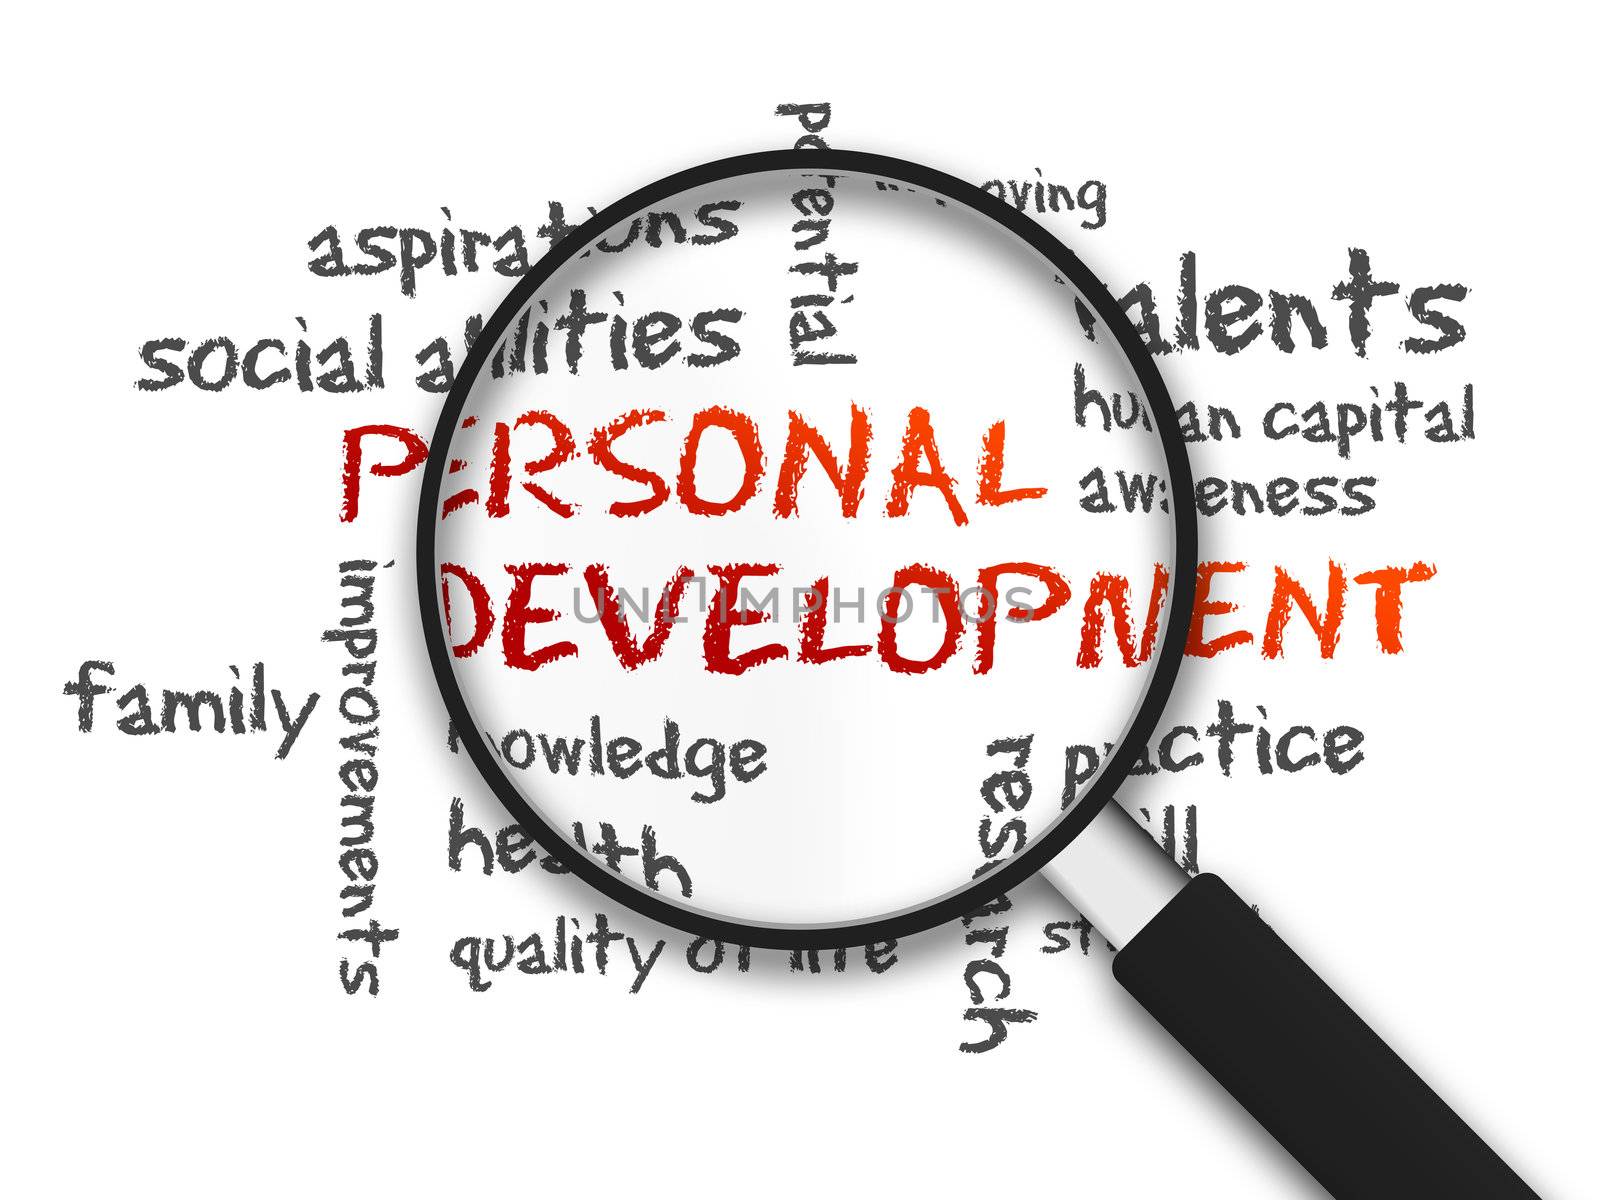 Magnified Personal Development word illustration on white background.